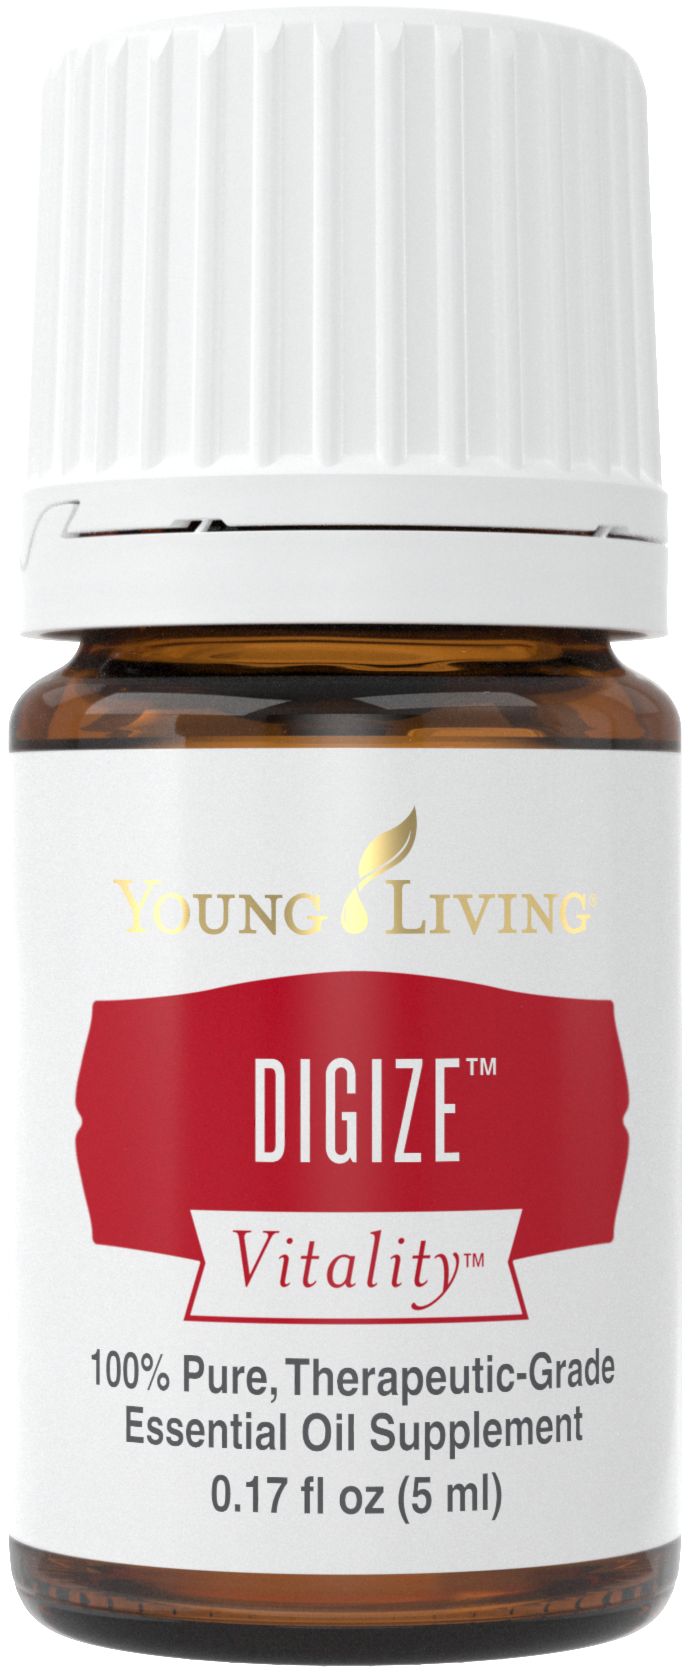 Digize Vitality benefits and uses